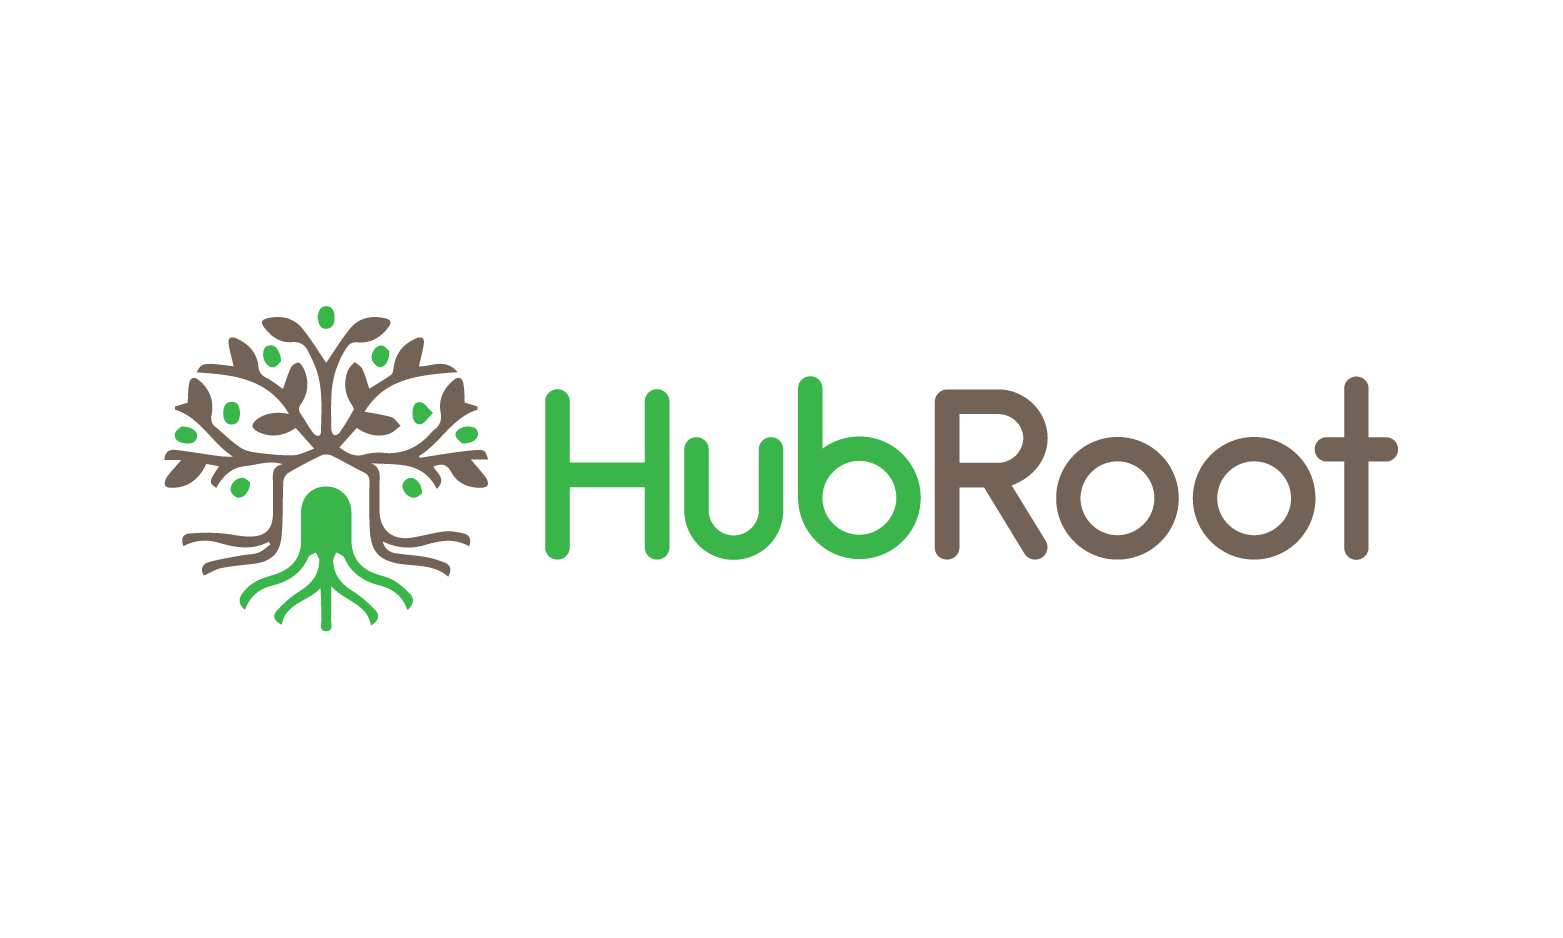 HubRoot.com - Creative brandable domain for sale